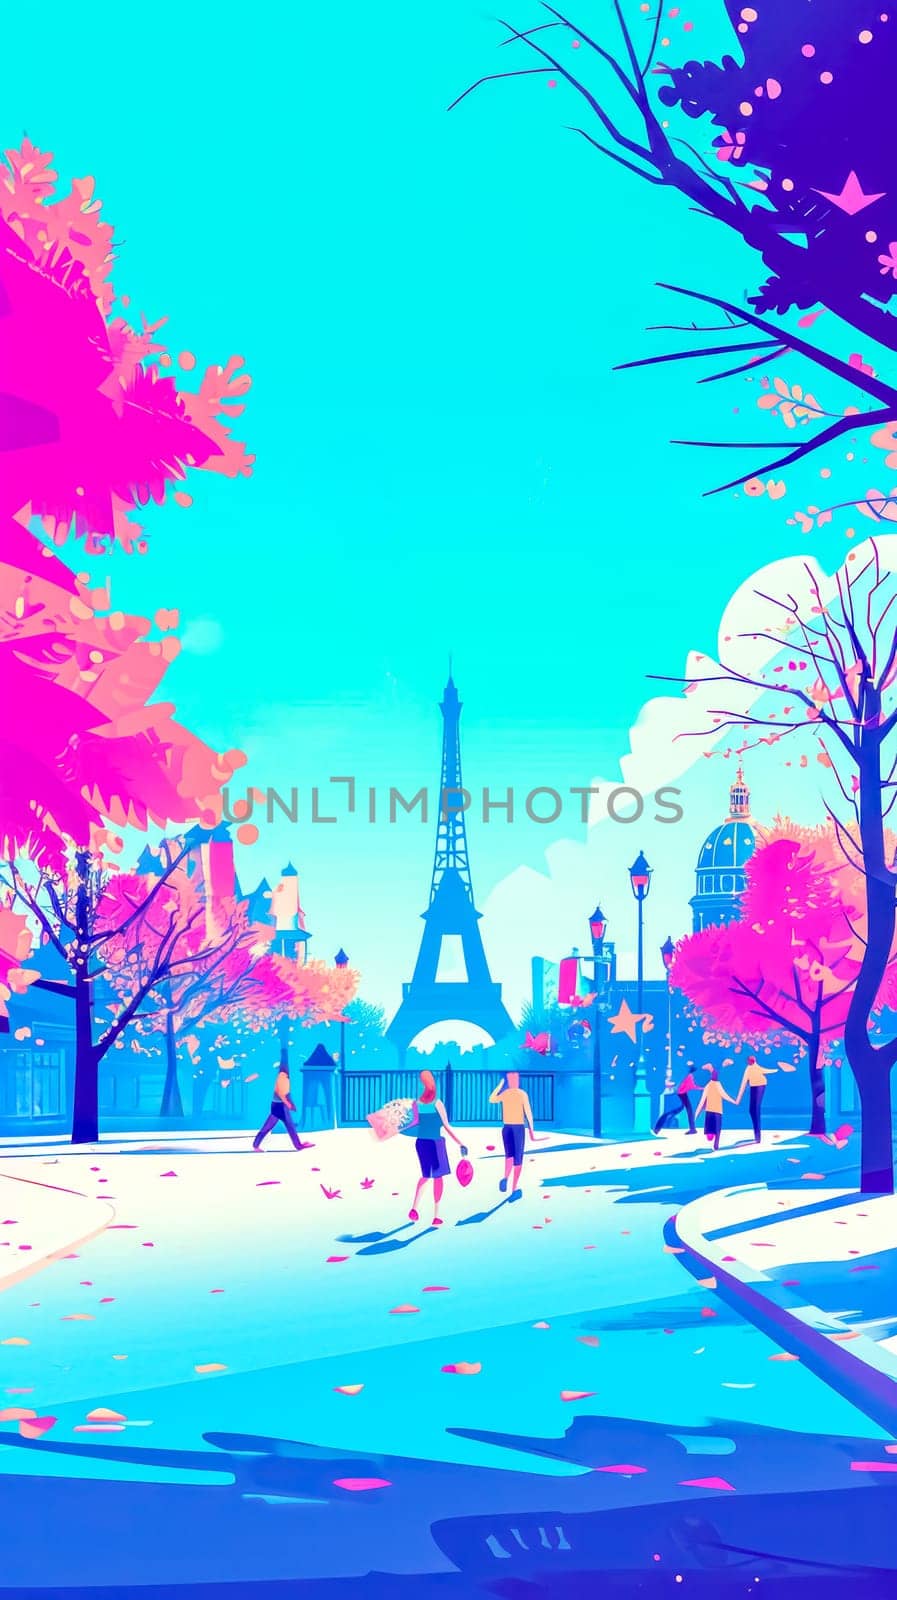 Paris with the Eiffel Tower in the background, featuring people walking along a path with trees in various shades of pink and blue. vertical